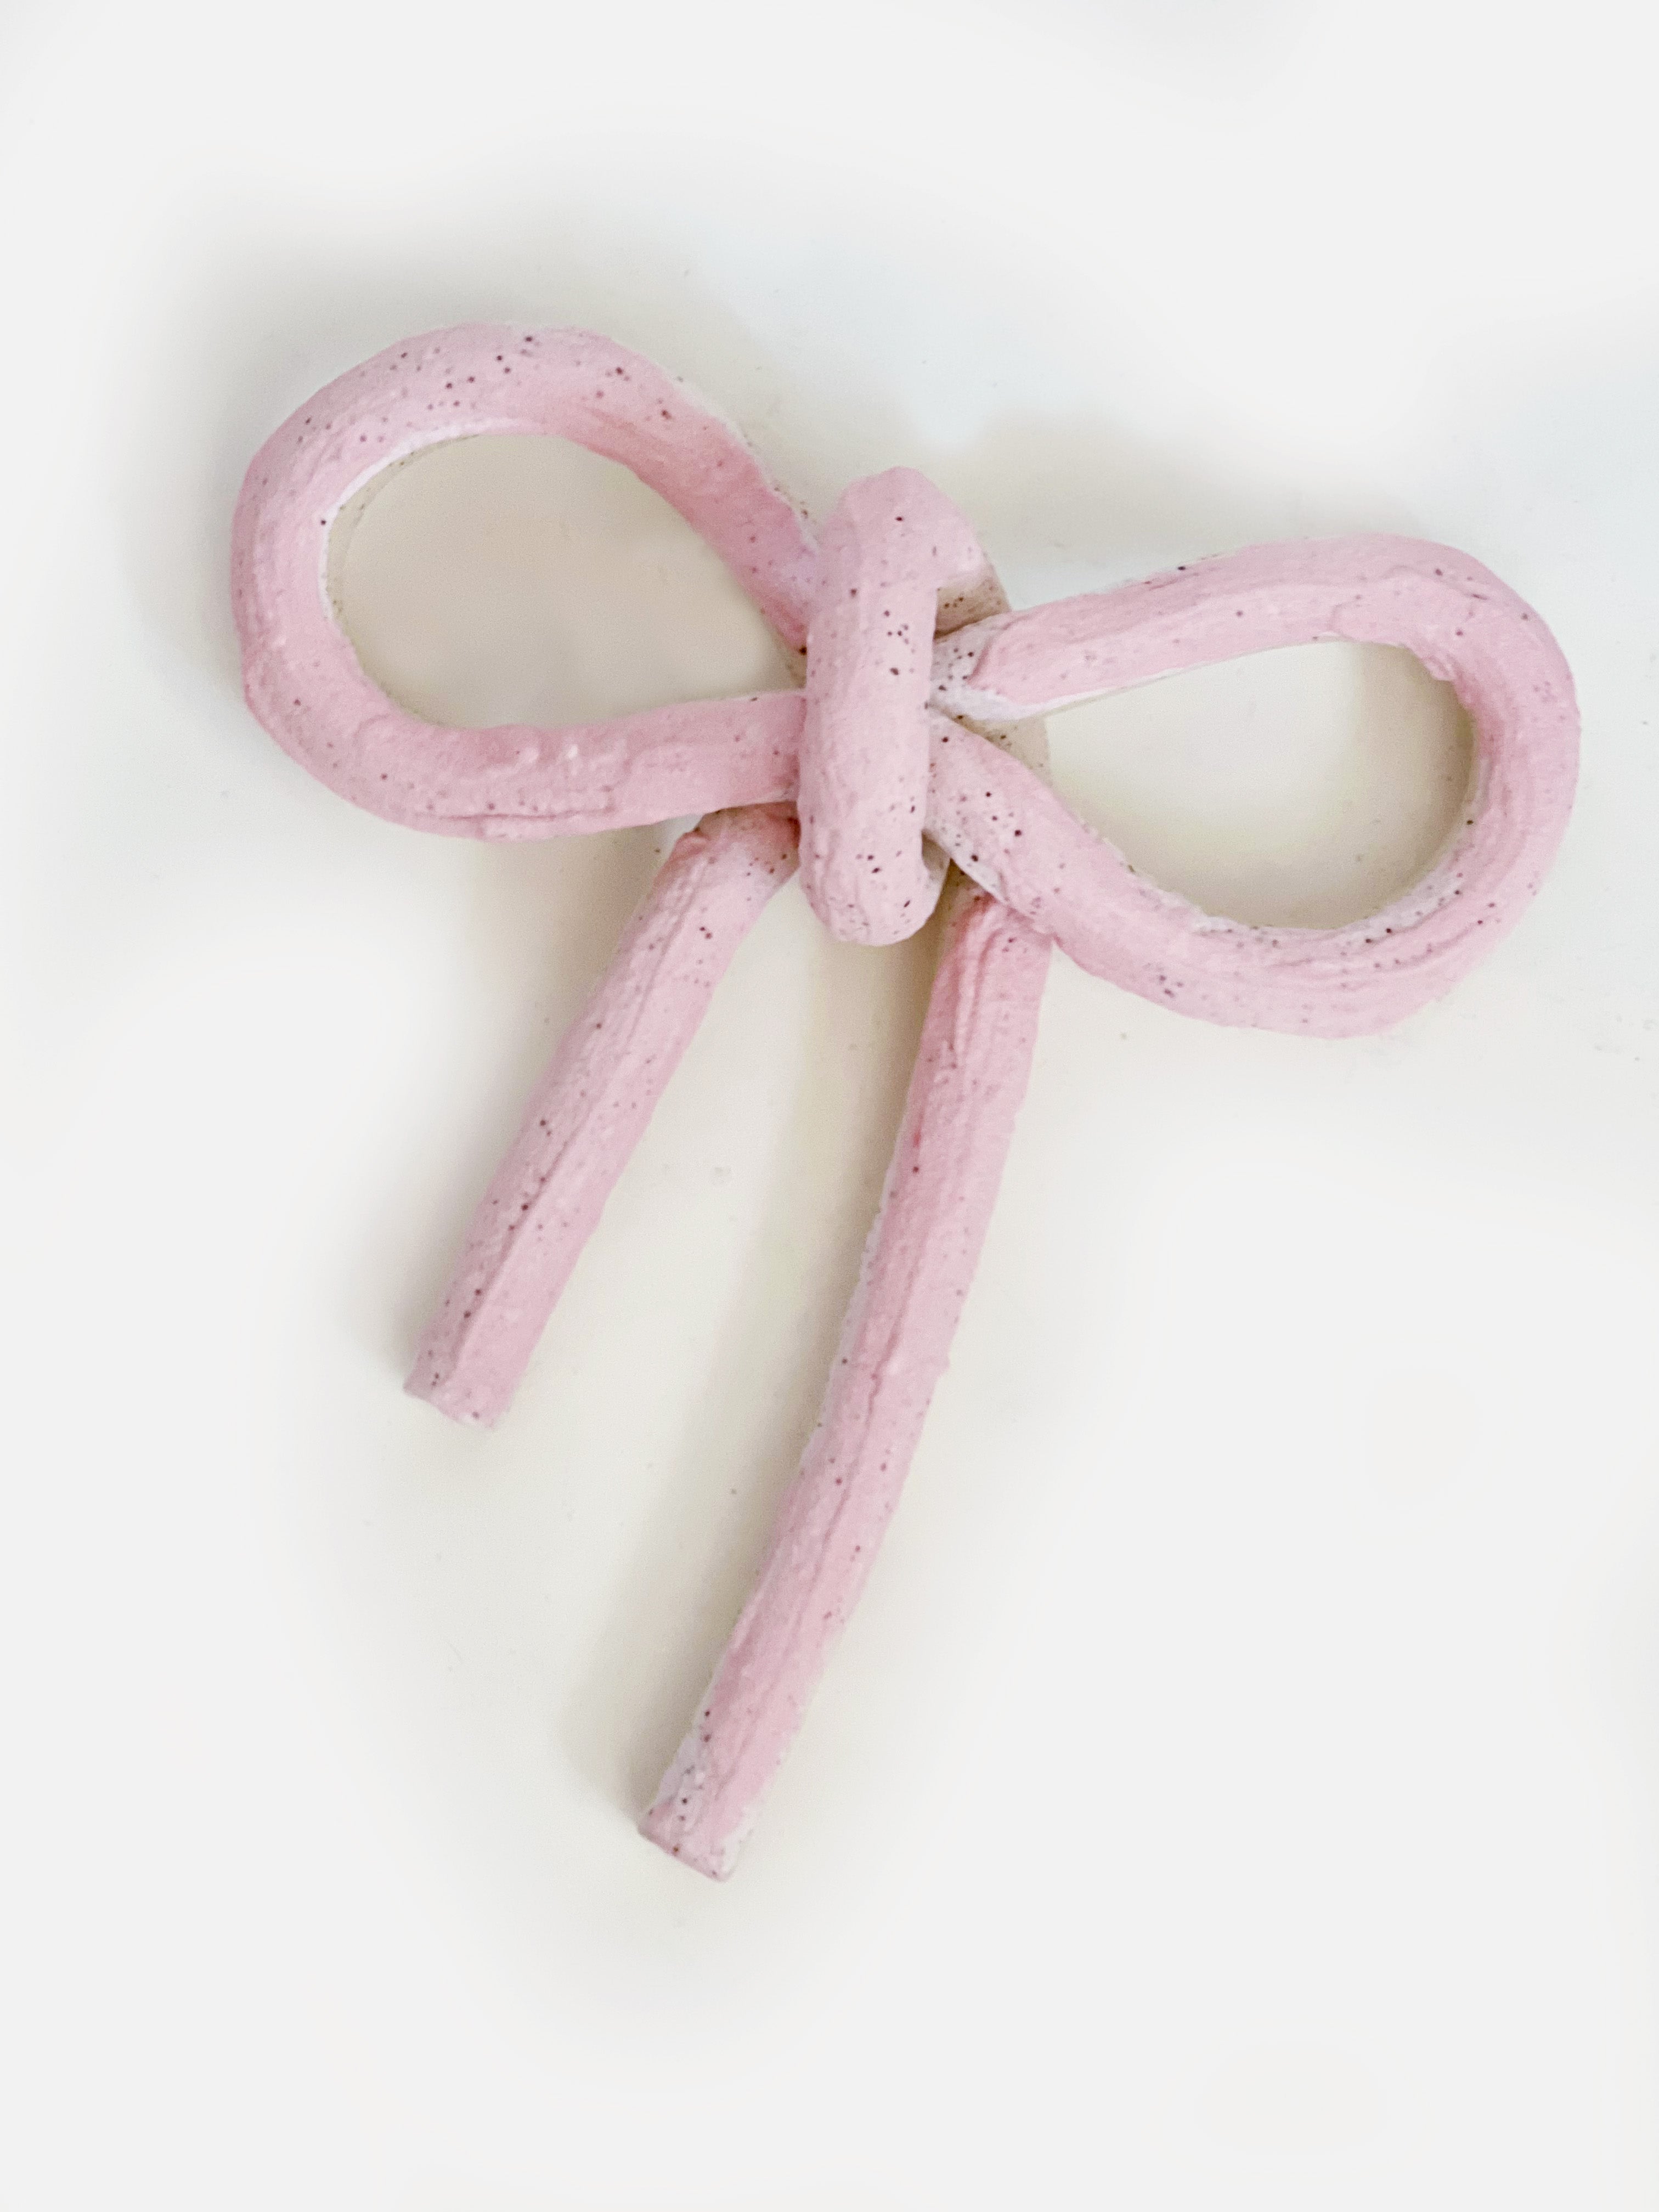 Clay Object 92 - Large Pink Bow Hanging